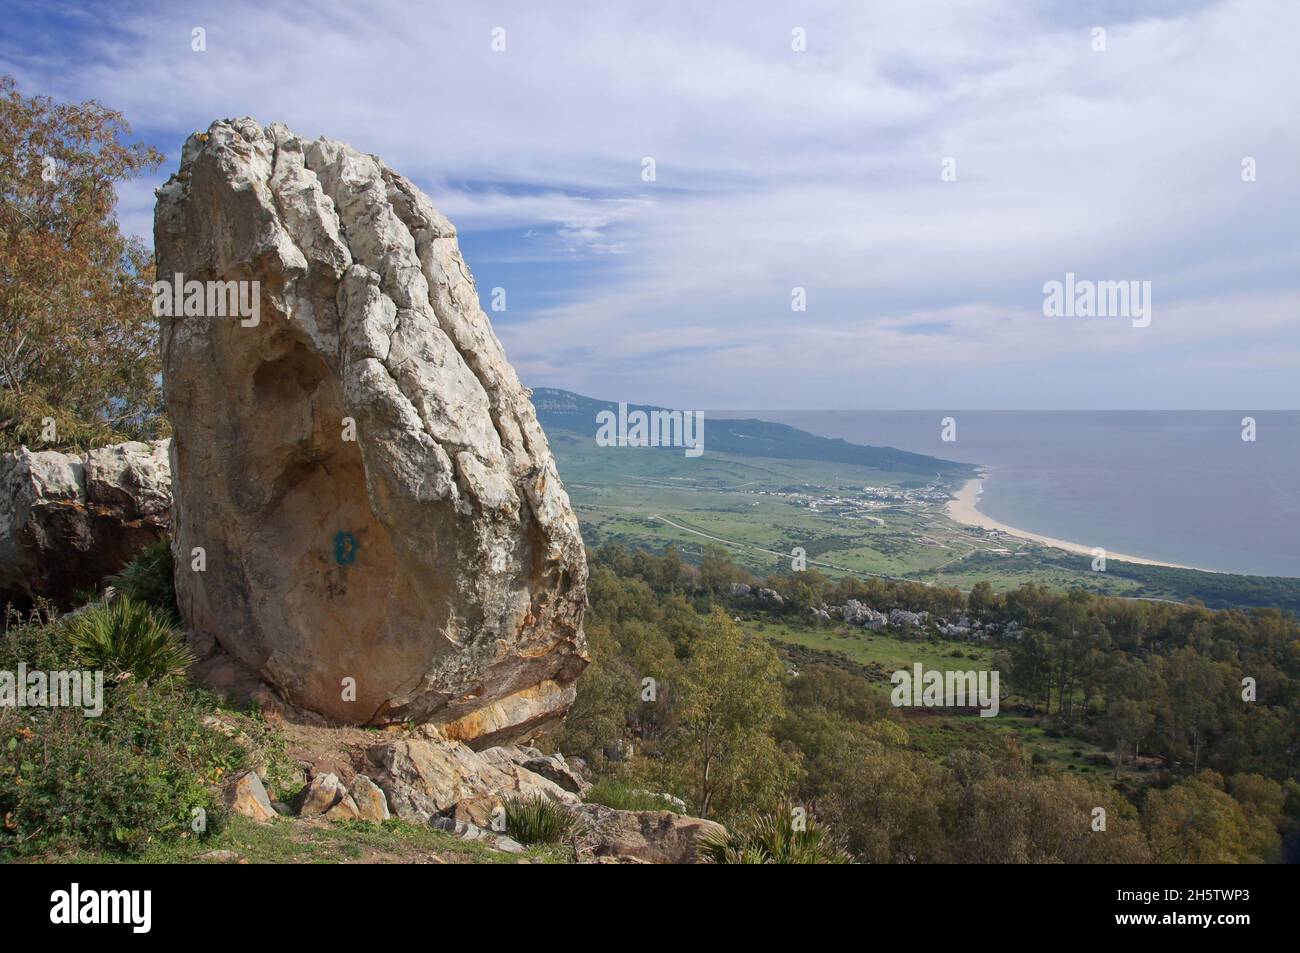 Spain: the view of Bolonia and the Atlantic coast from the Sierra de la Plata Stock Photo